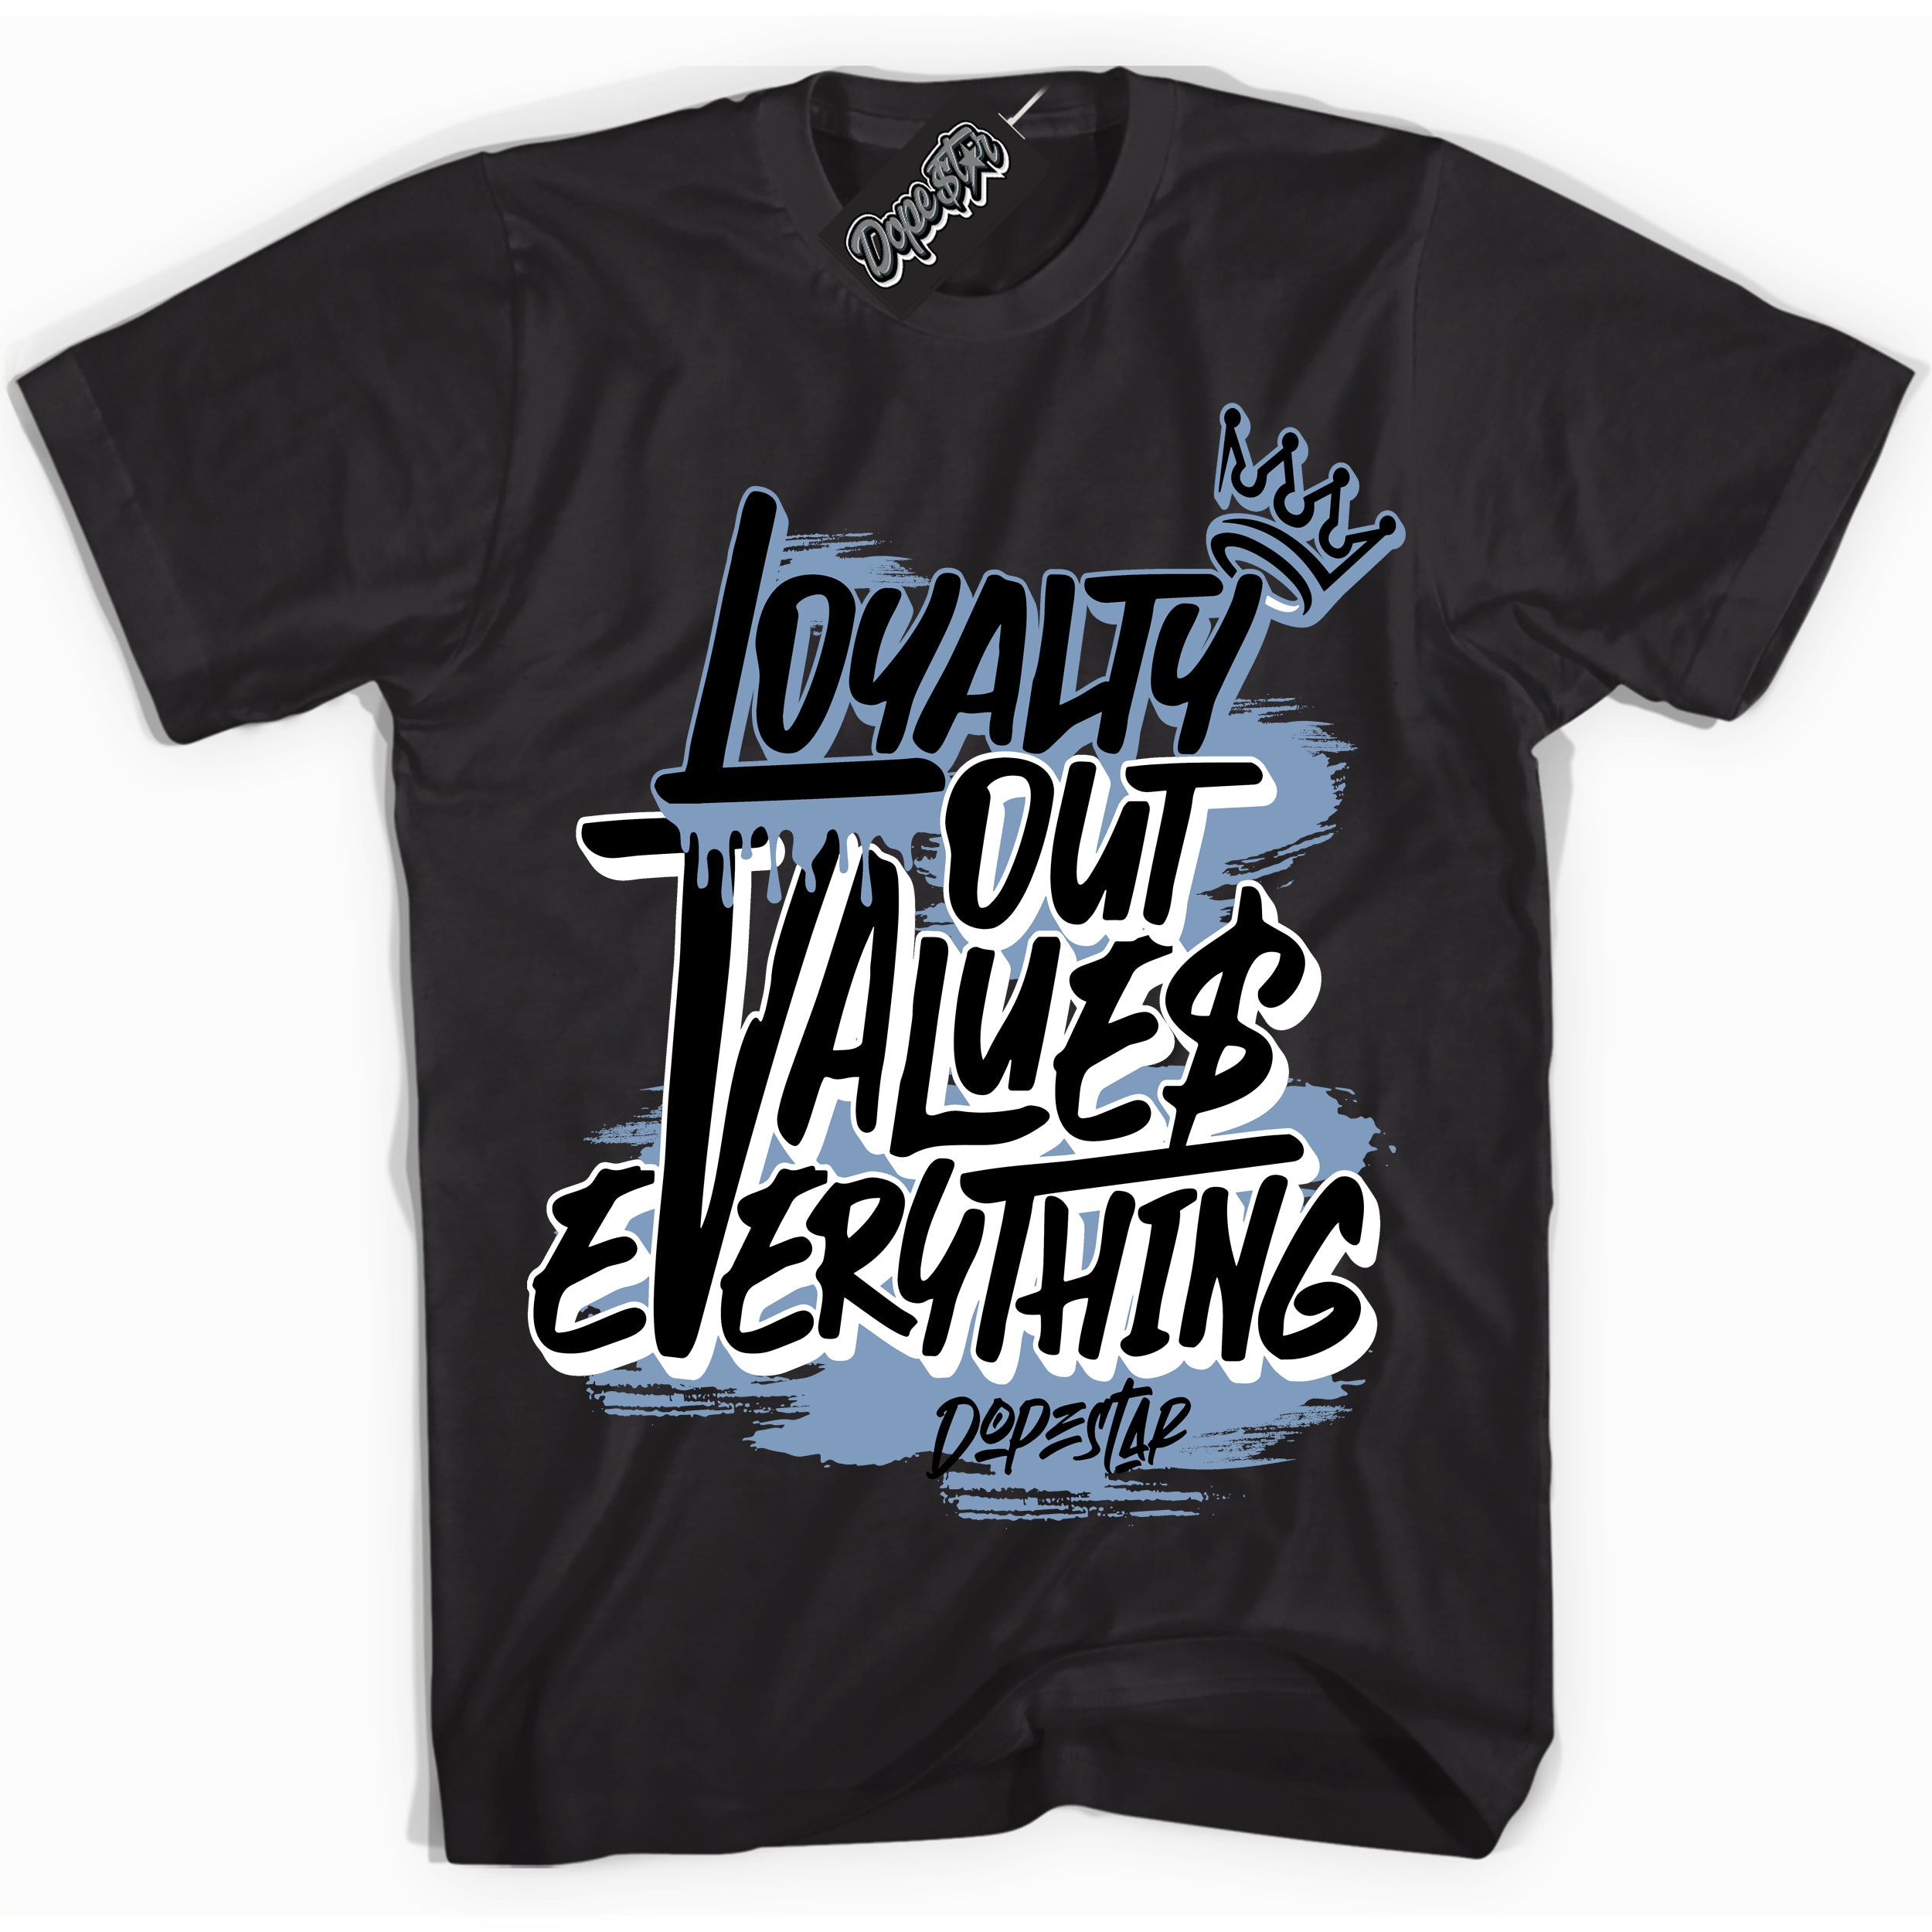 Cool Black Shirt with “ Loyalty Out Values Everything” design that perfectly matches SE Space Jam 1s Sneakers.